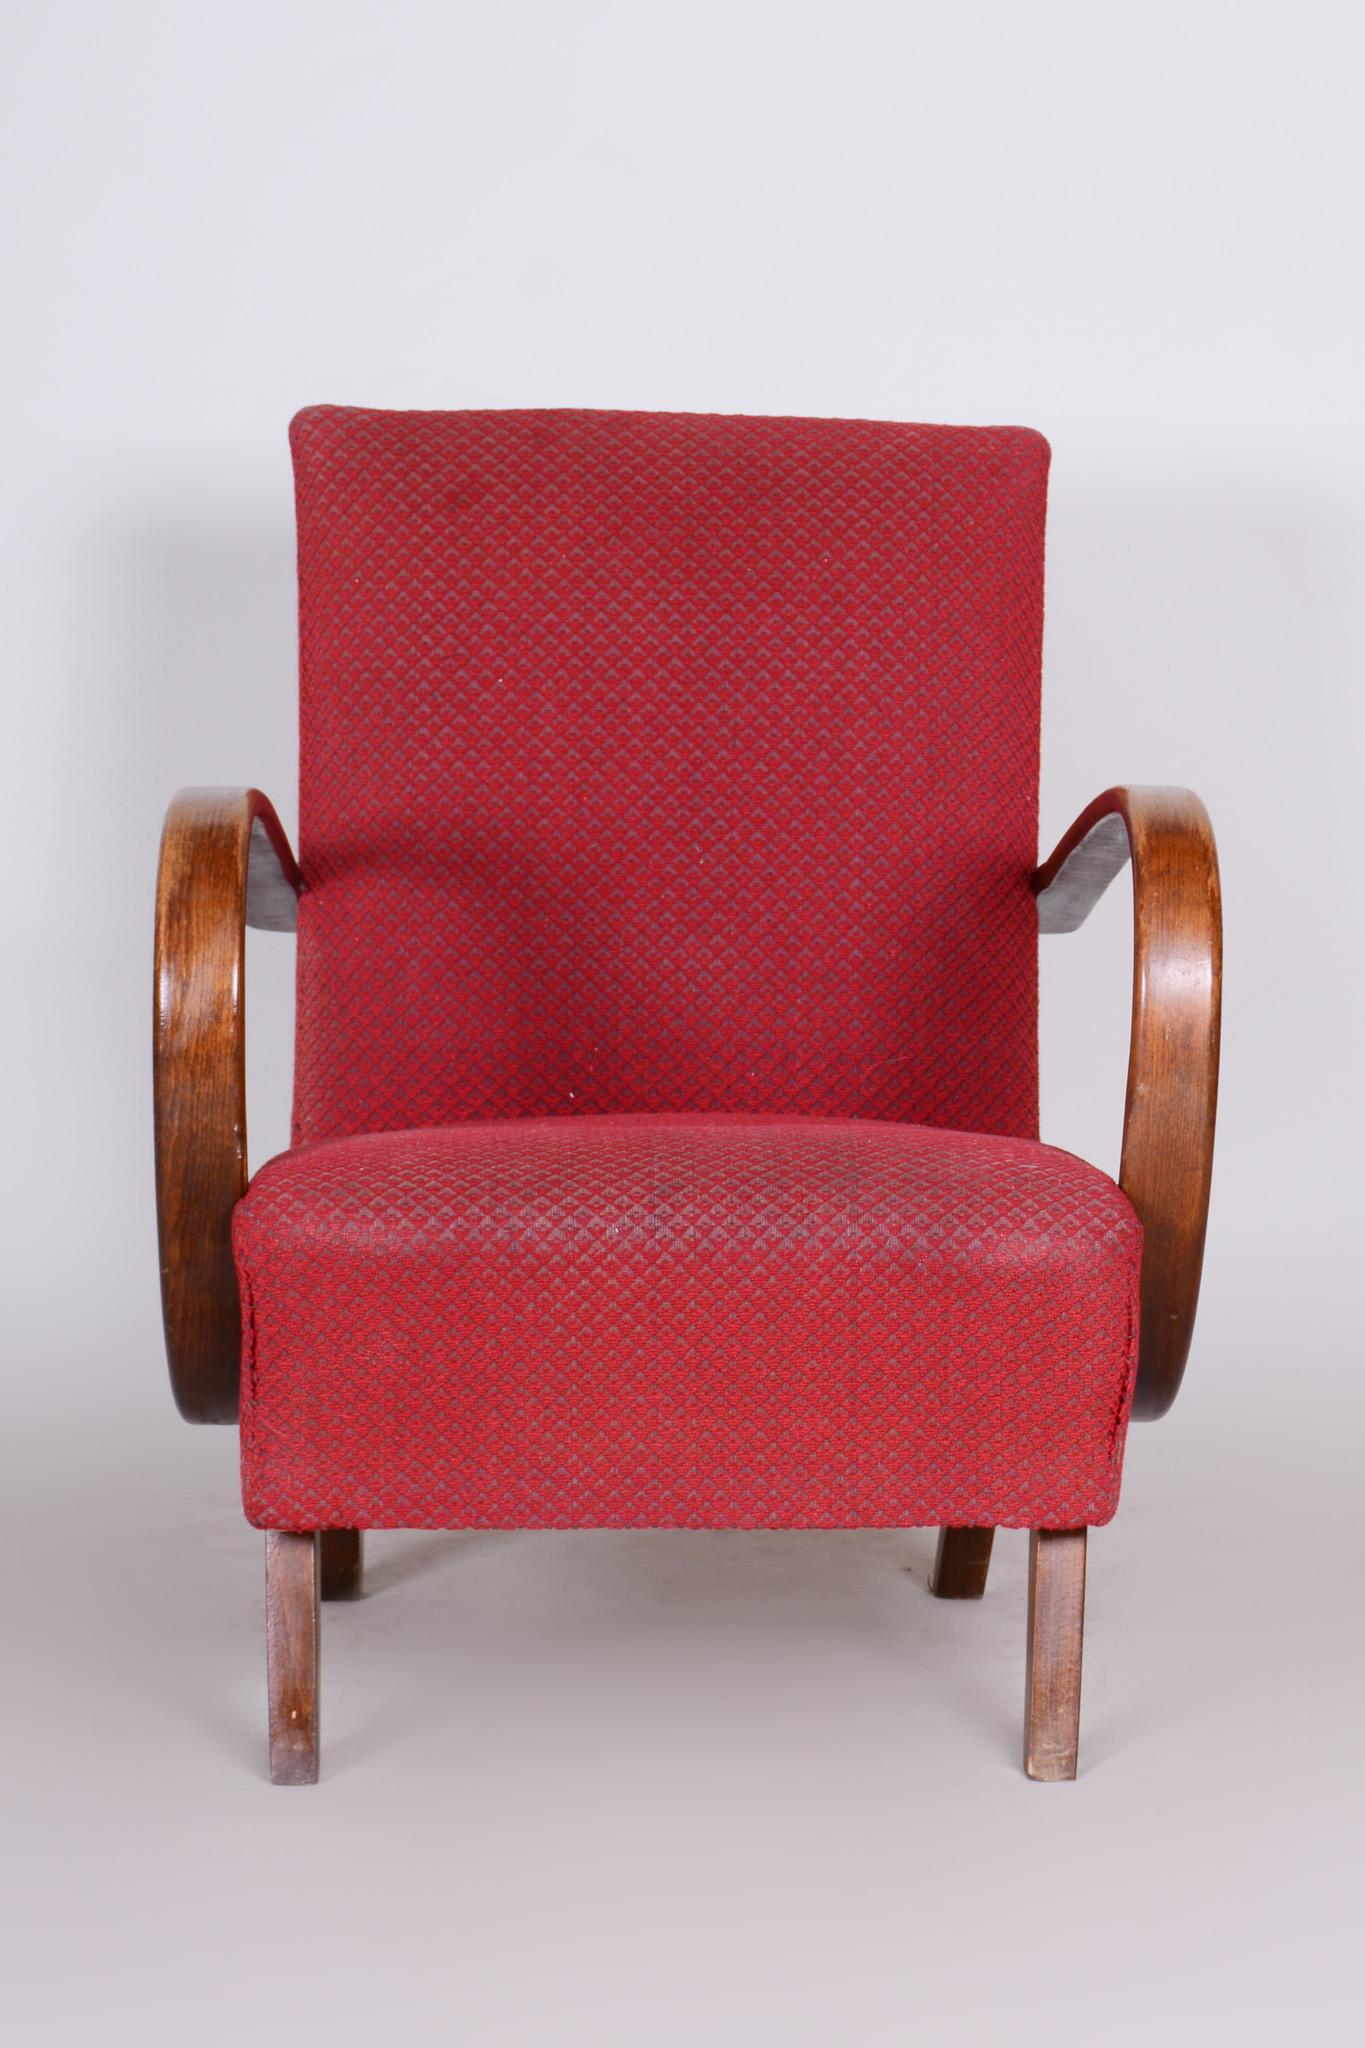 Red armchair
Sold Individually
Source: Czechia (Czech republic)
Period: 1930-1939.
Material: Beech
Original well preserved condition.